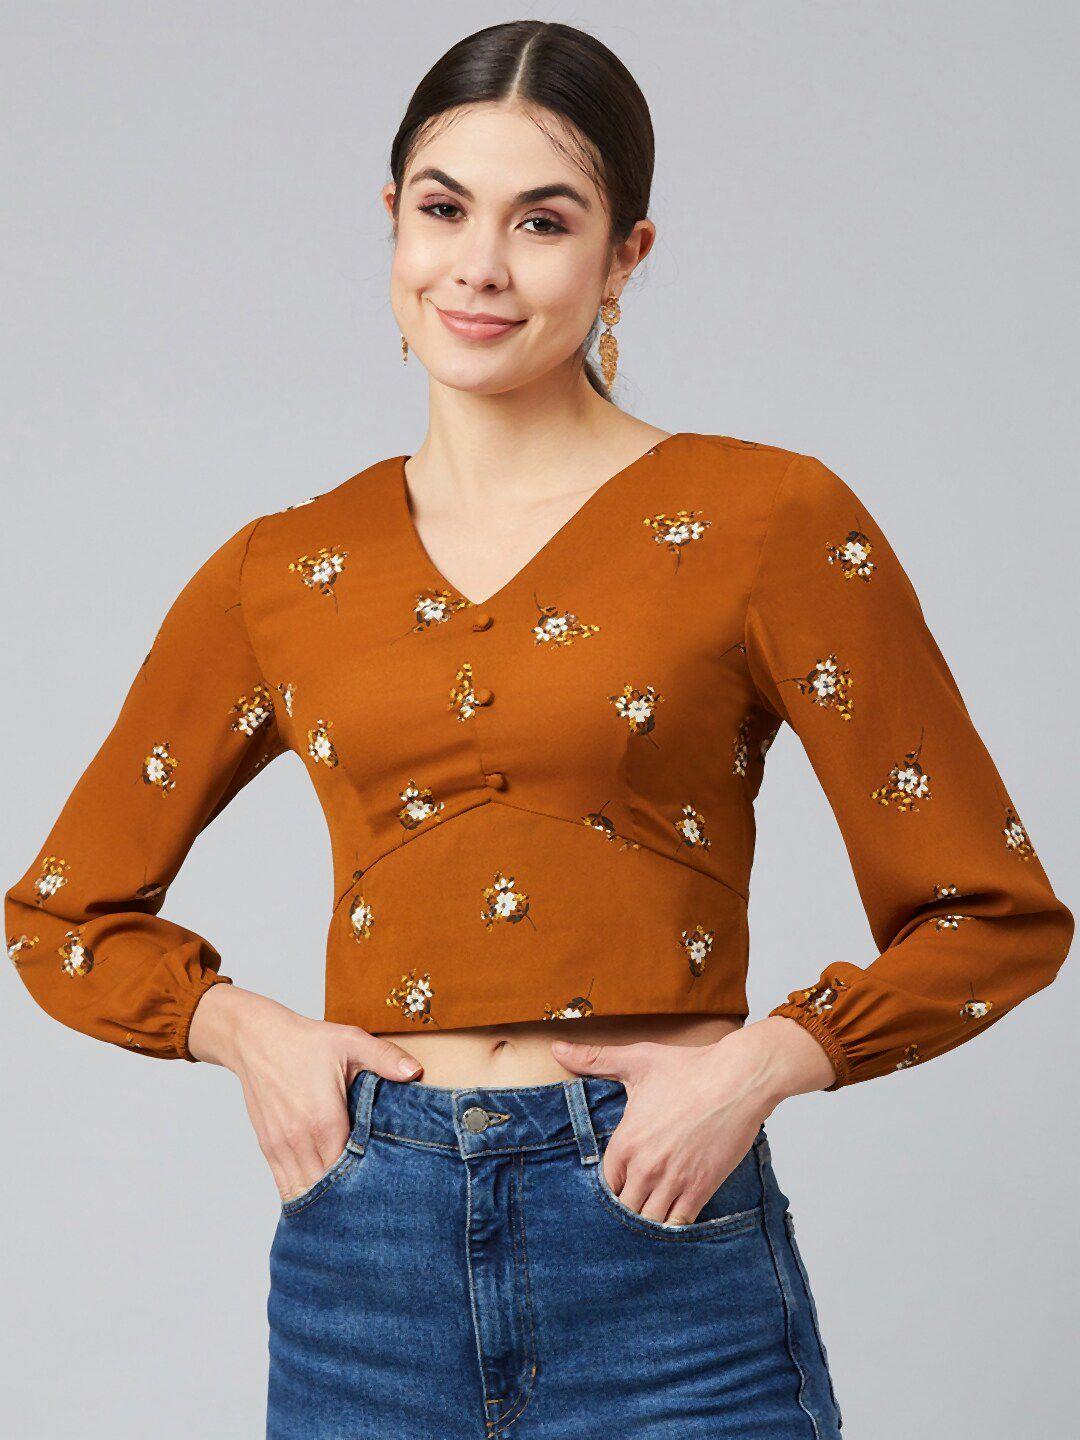 marie-claire-women-brown-&-white-floral-georgette-fitted-crop-top